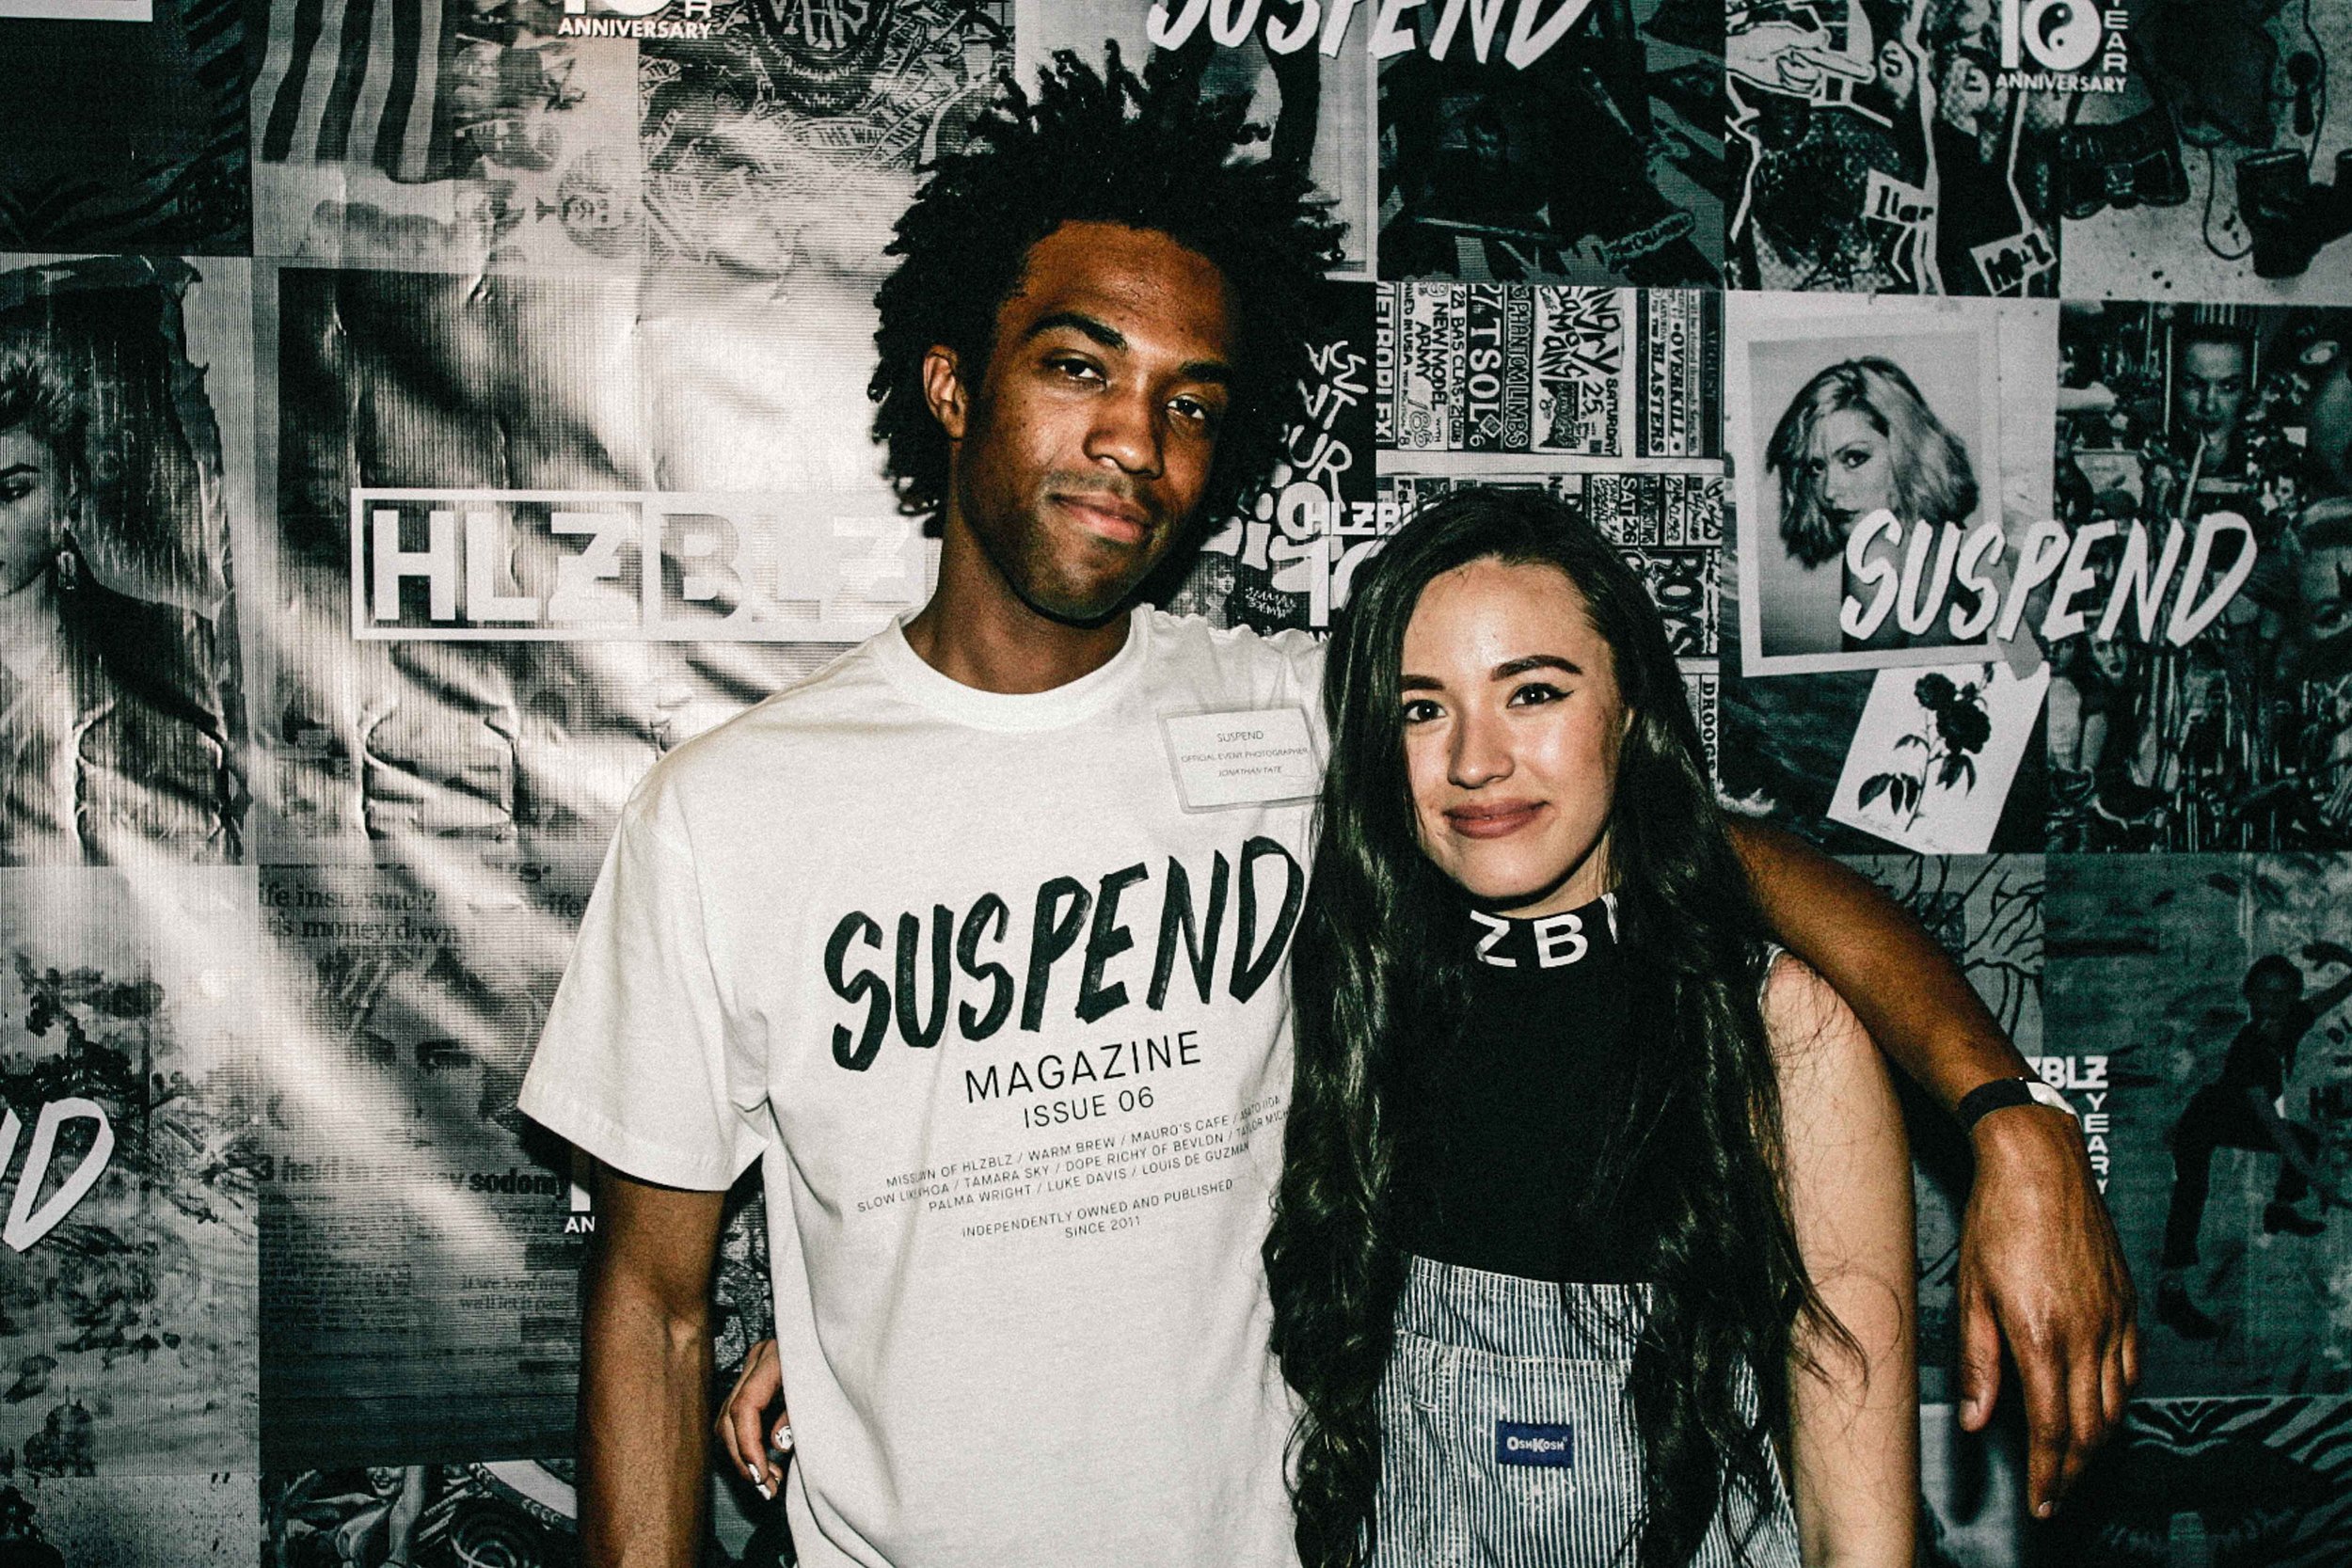  Jonathan Tate with Tiffany Anthony at the ISSUE 06 Release Party x 10YR HLZBLZ Anniversary (Feb 11) at Globe Theater. / Photo: © Jonathan Tate for SUSPEND Magazine. 